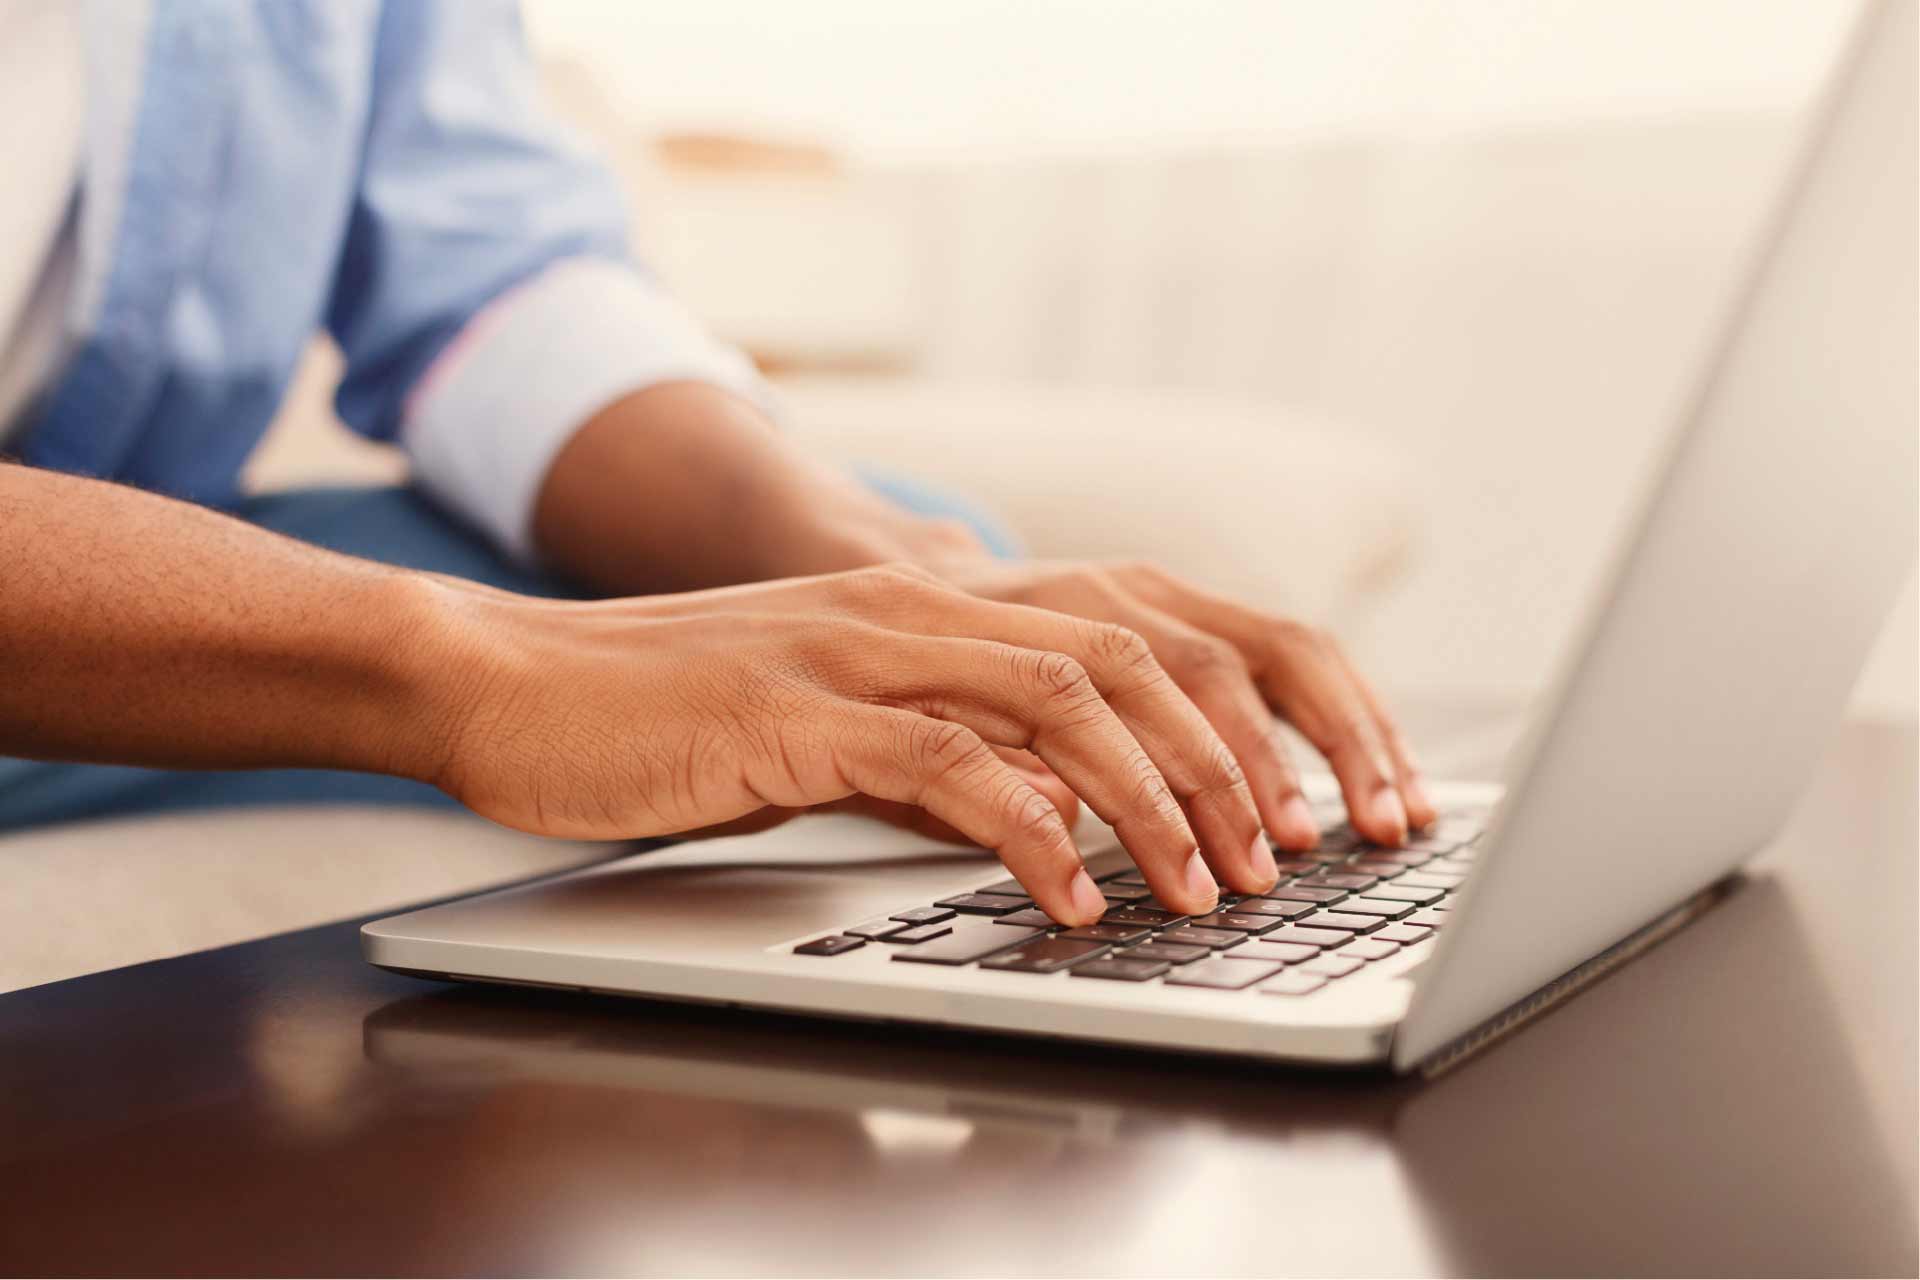 Close-up of hands on a laptop keyboard, as the person completes the online med card application.